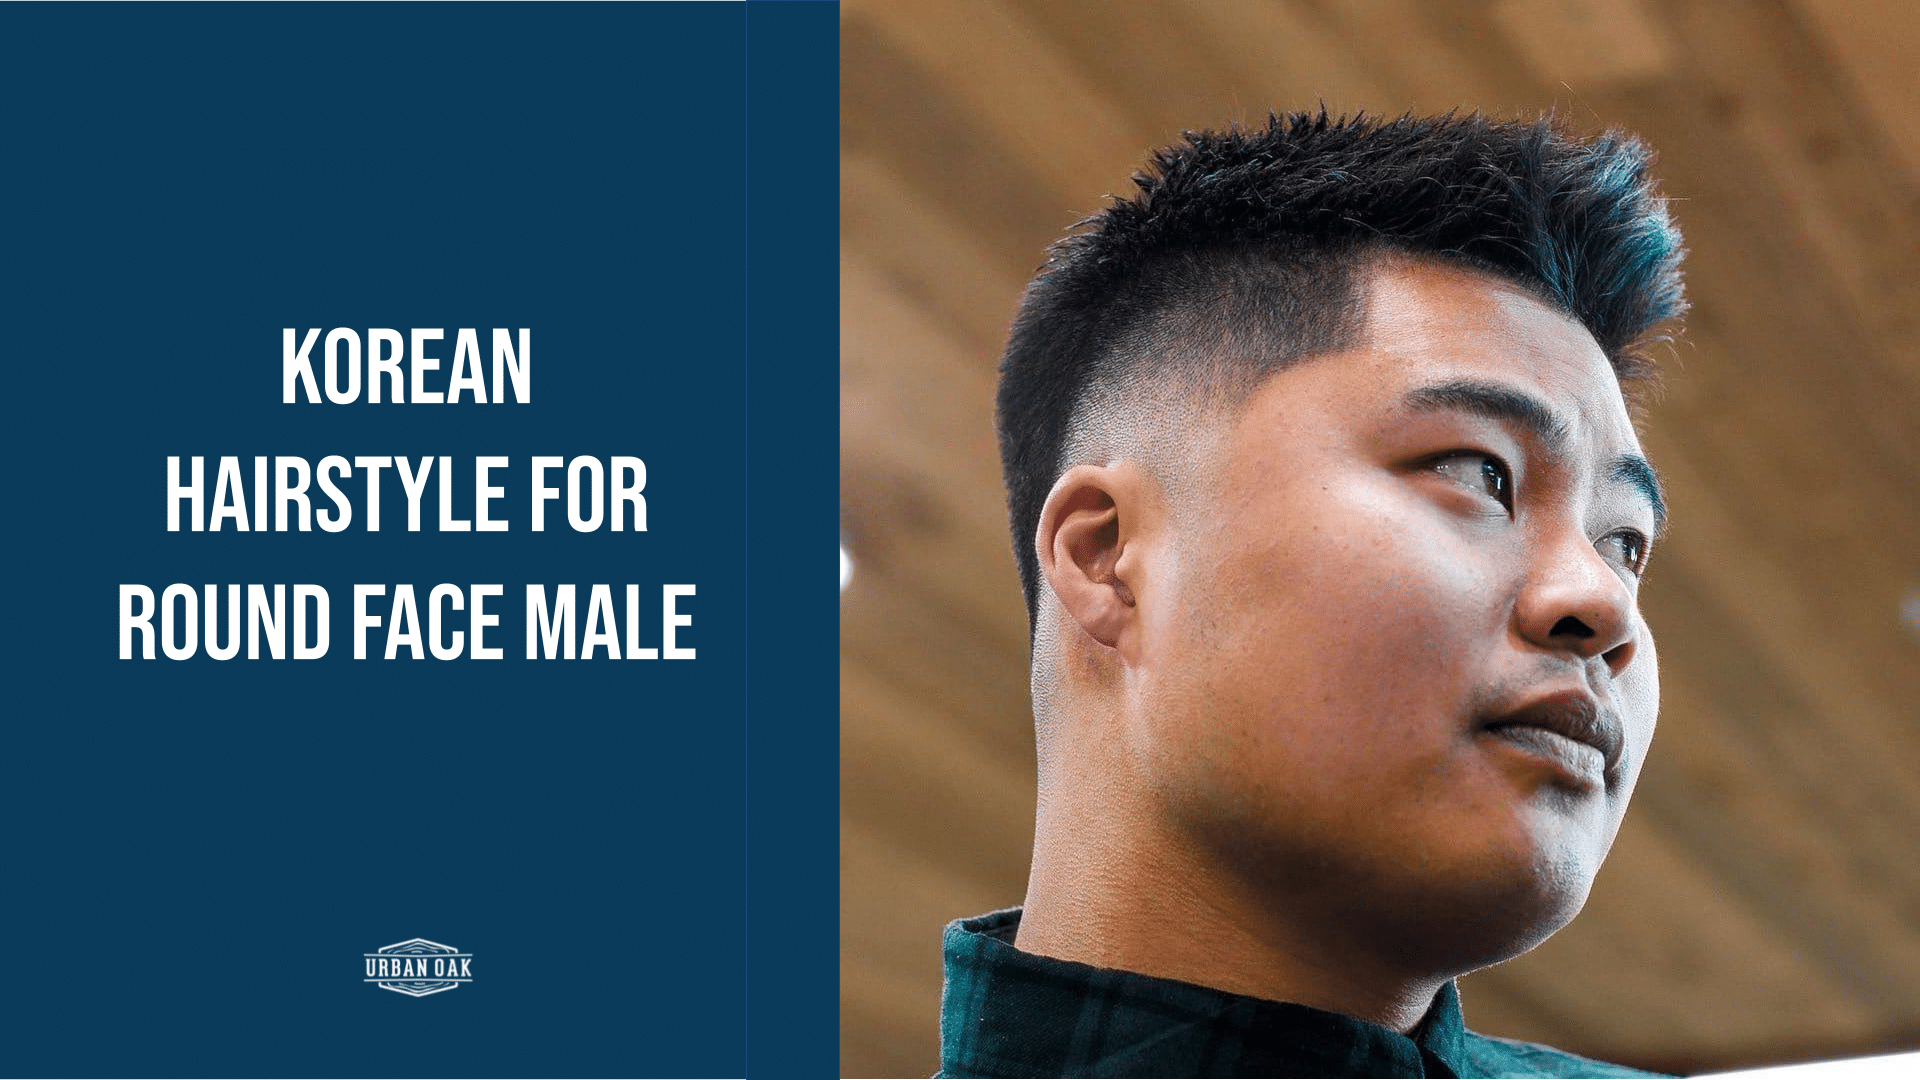 Korean hairstyle for round face male